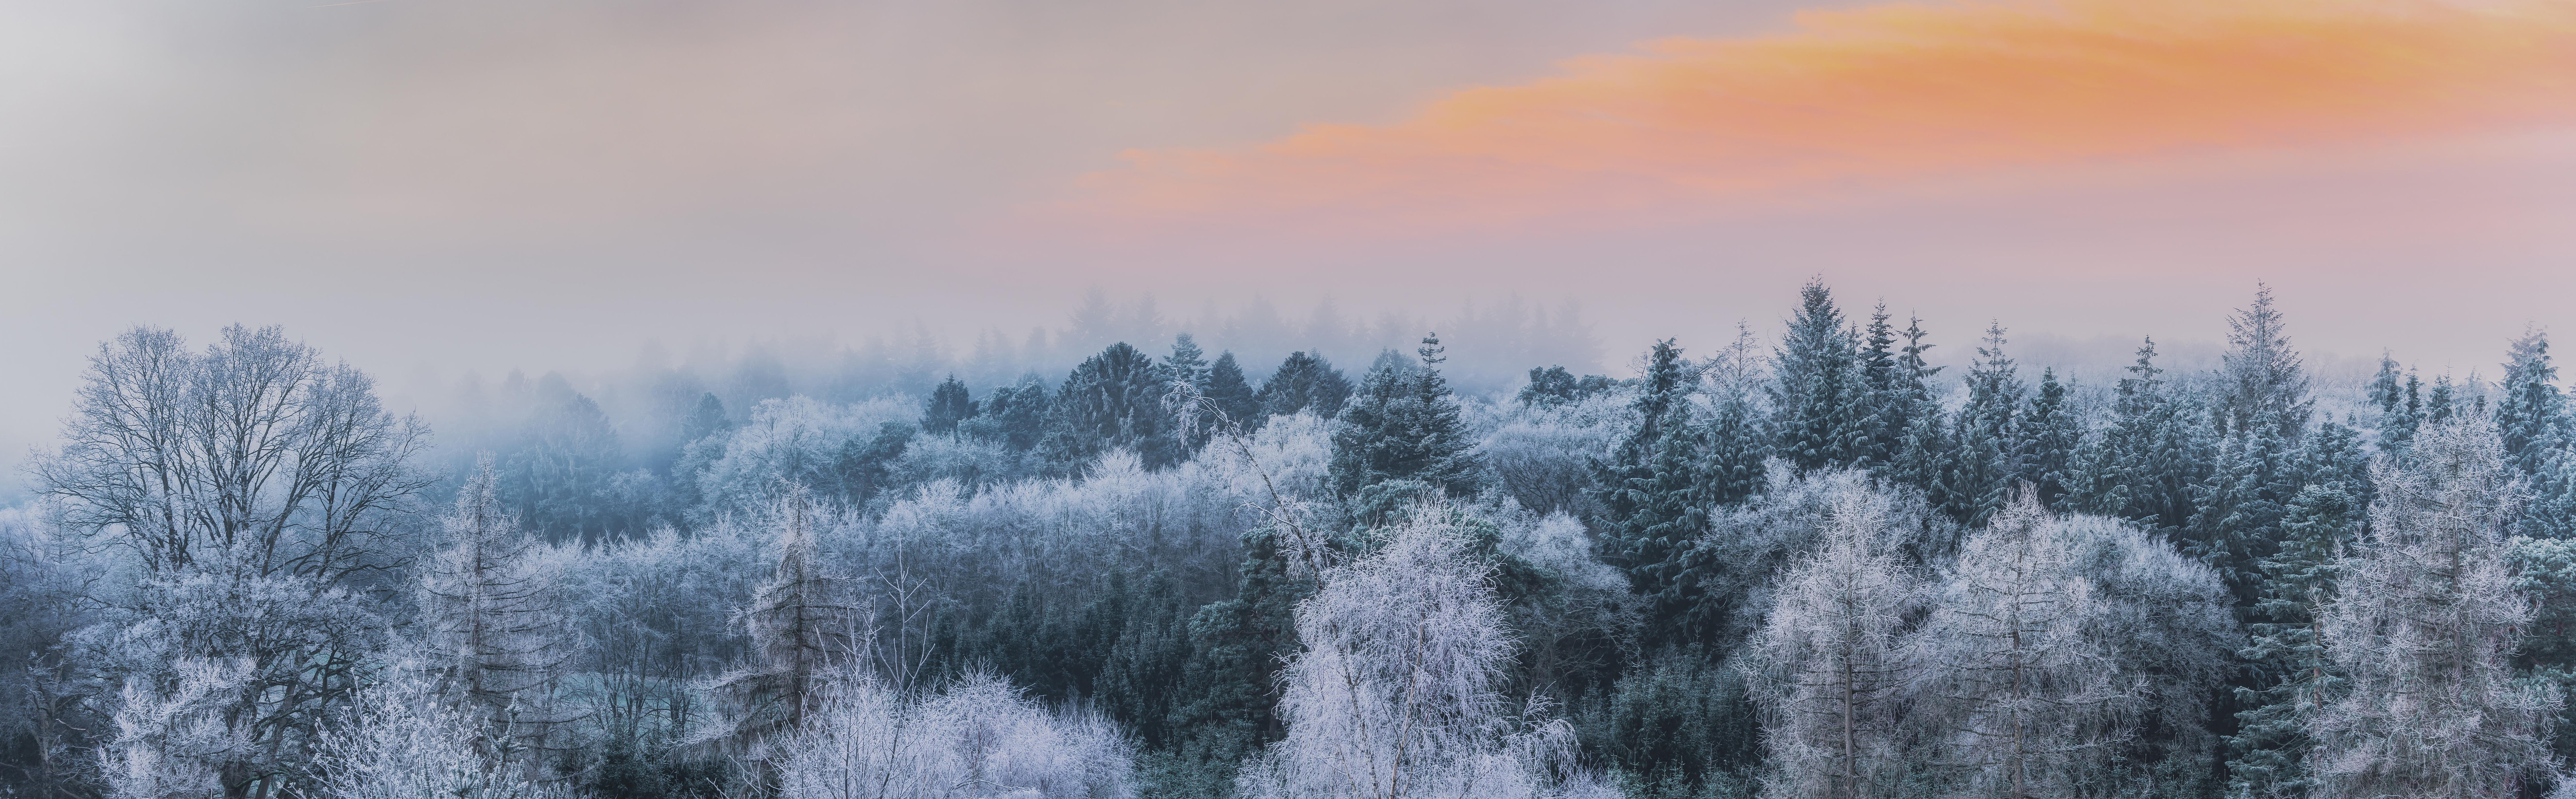 England UK Nature Landscape Frost Winter Morning Forest Trees Sunset 11500x3566